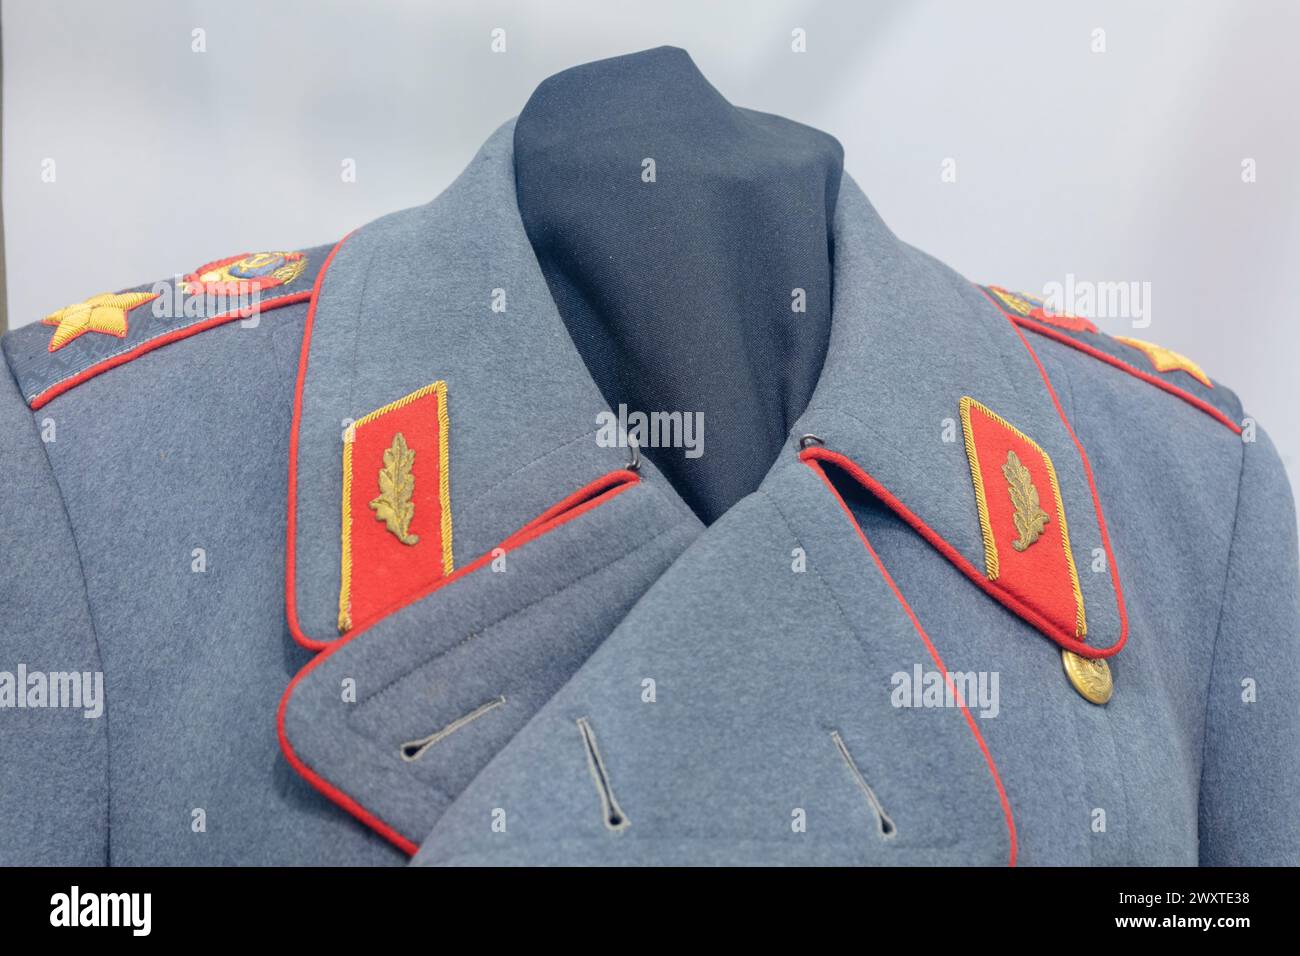 Maréchal Georgy Zhukov Greatcoat, musée, Kalouga, Russie Banque D'Images